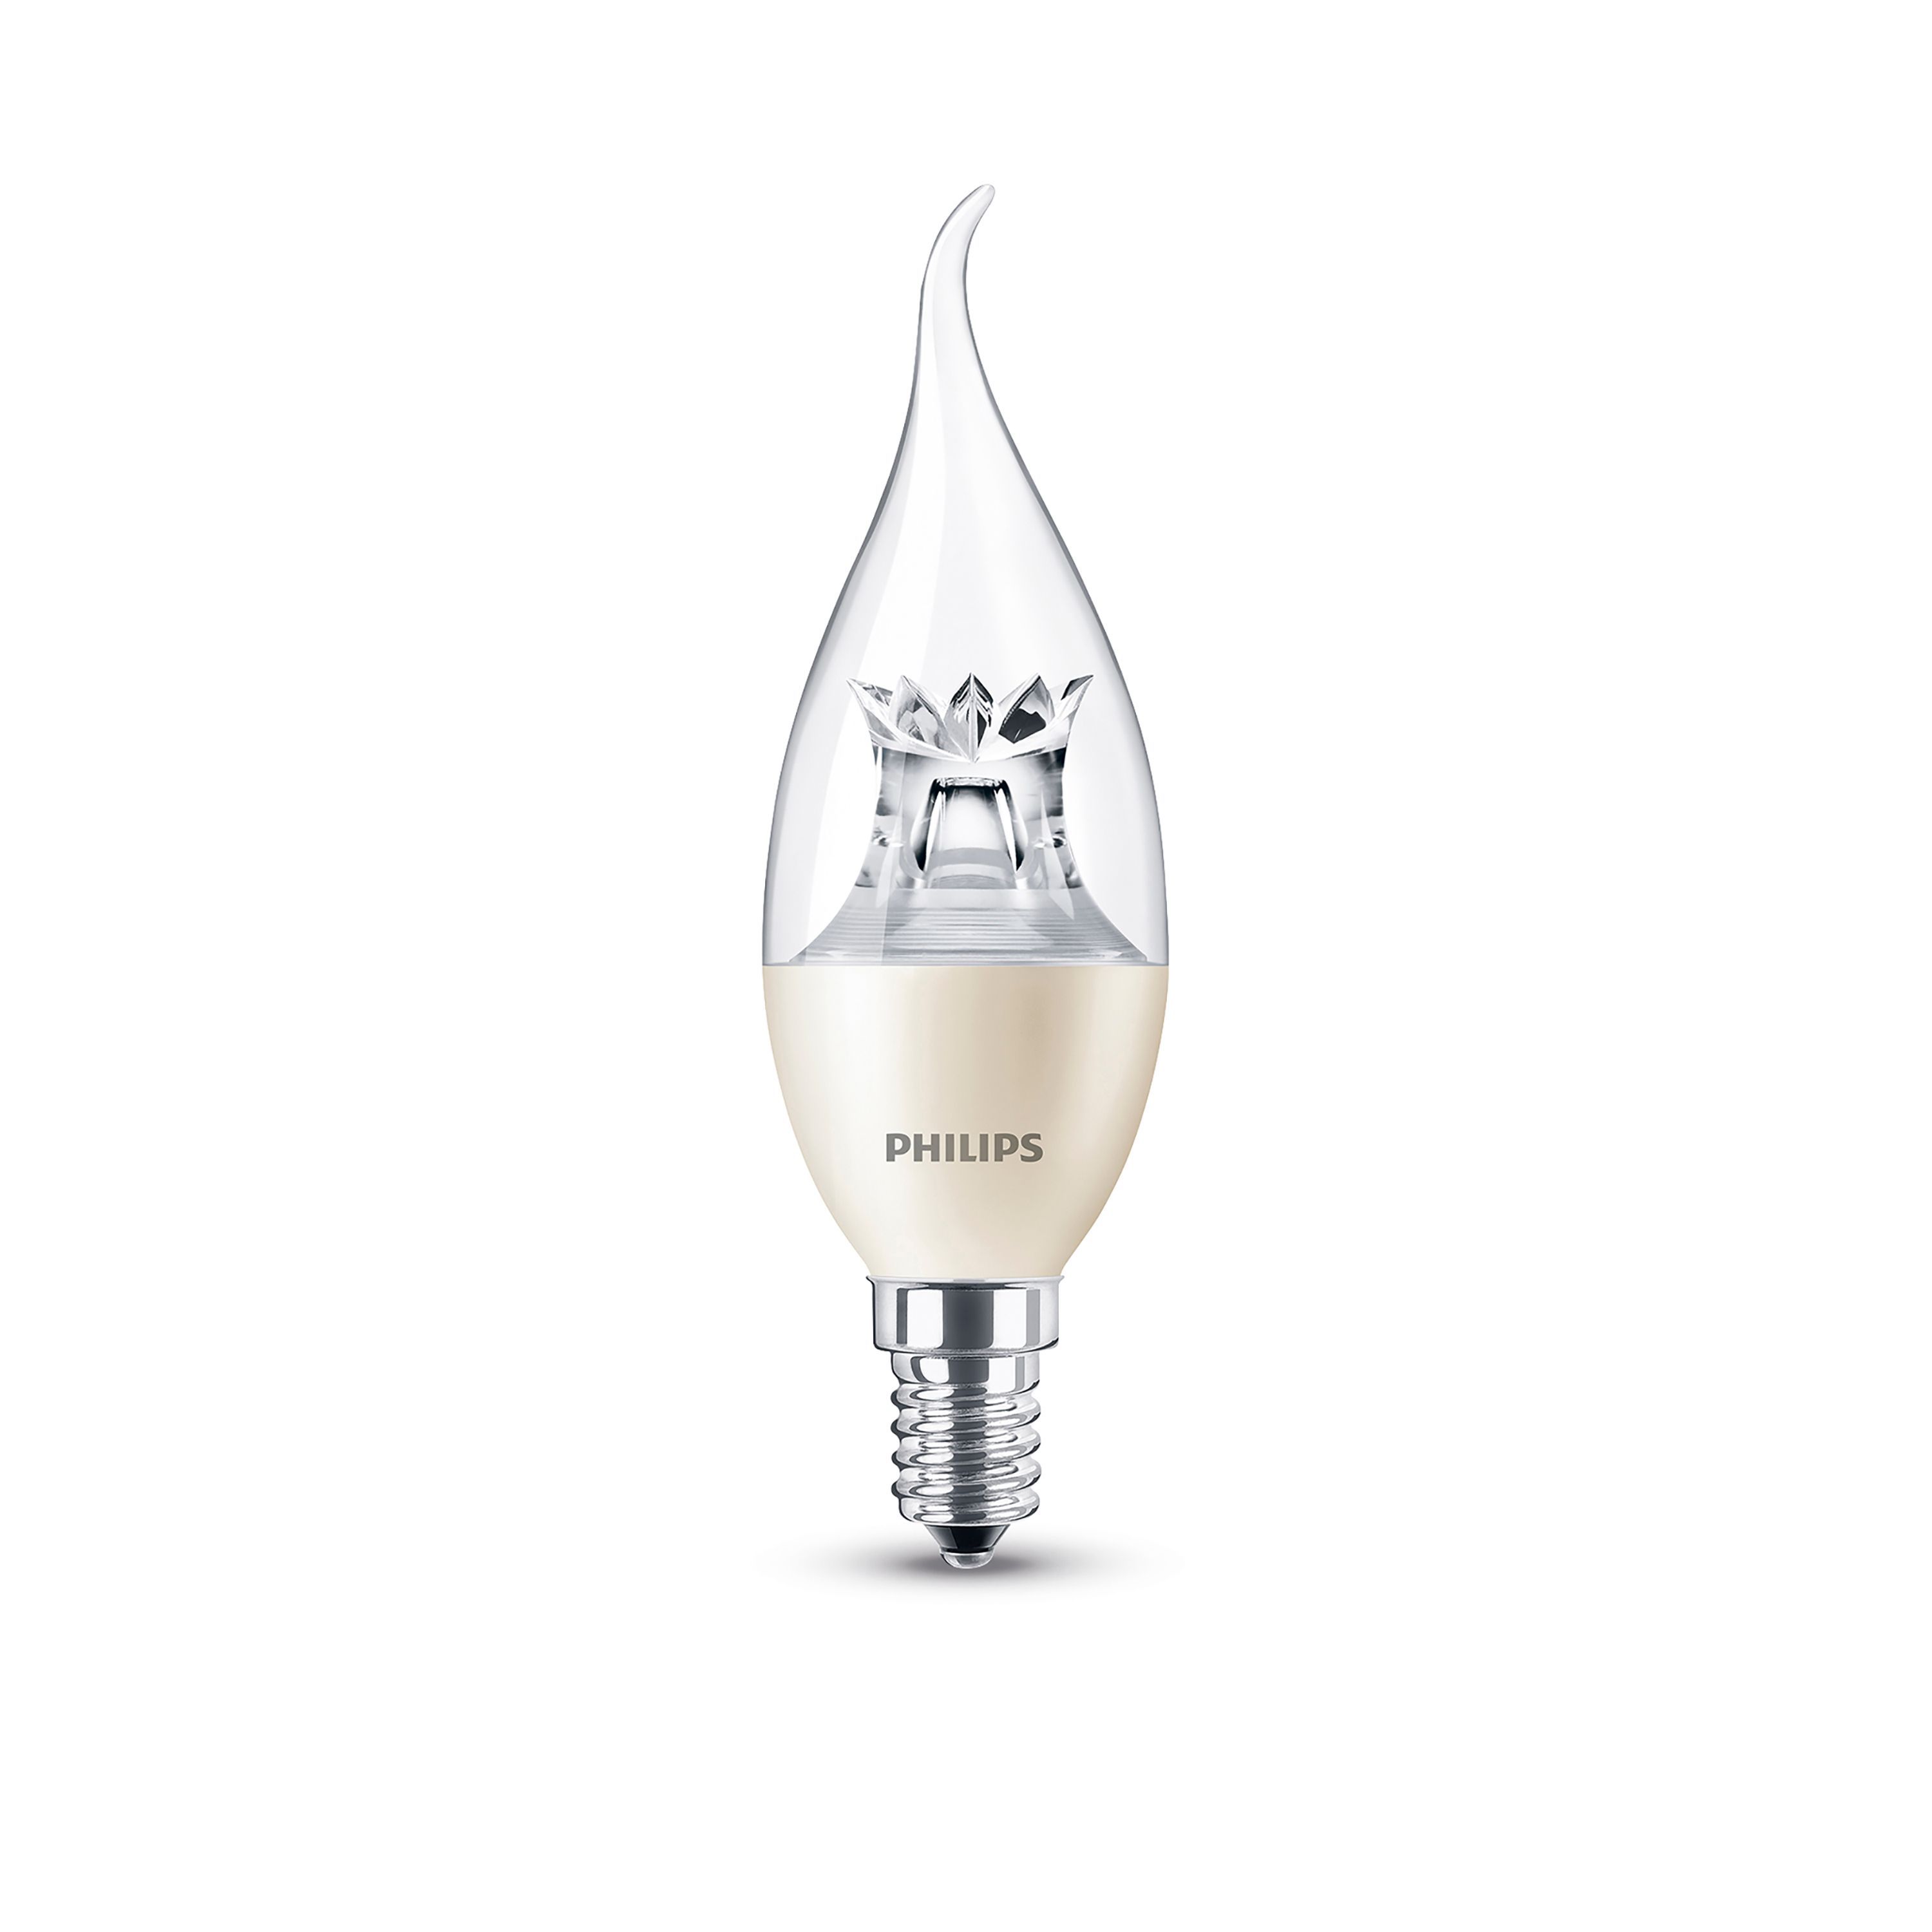 Philips E14 250Lm Led Dimmable Candle Bent Tip Light Bulb